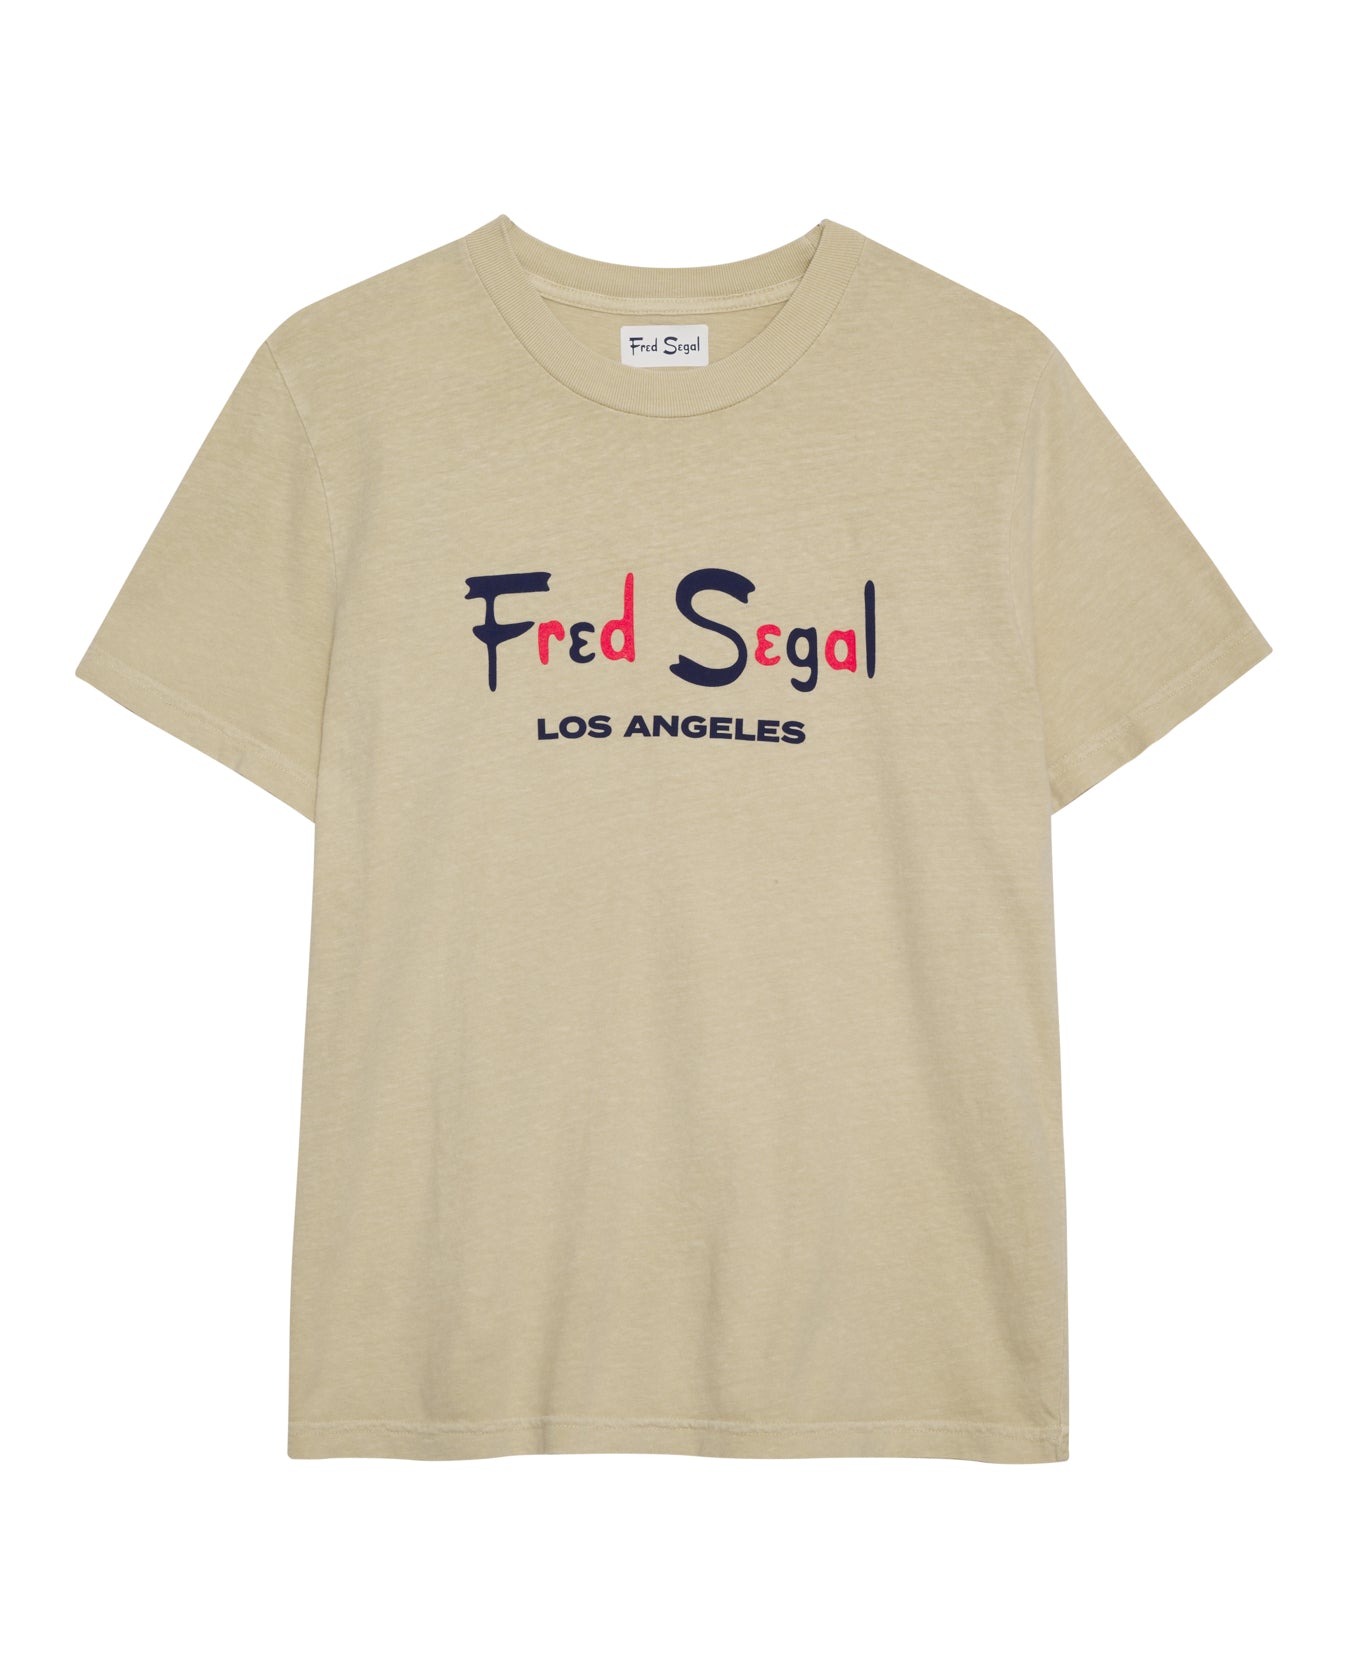 Fred Segal - Women's Los Angeles Tee Shirt | Color: Off White | Size: 3